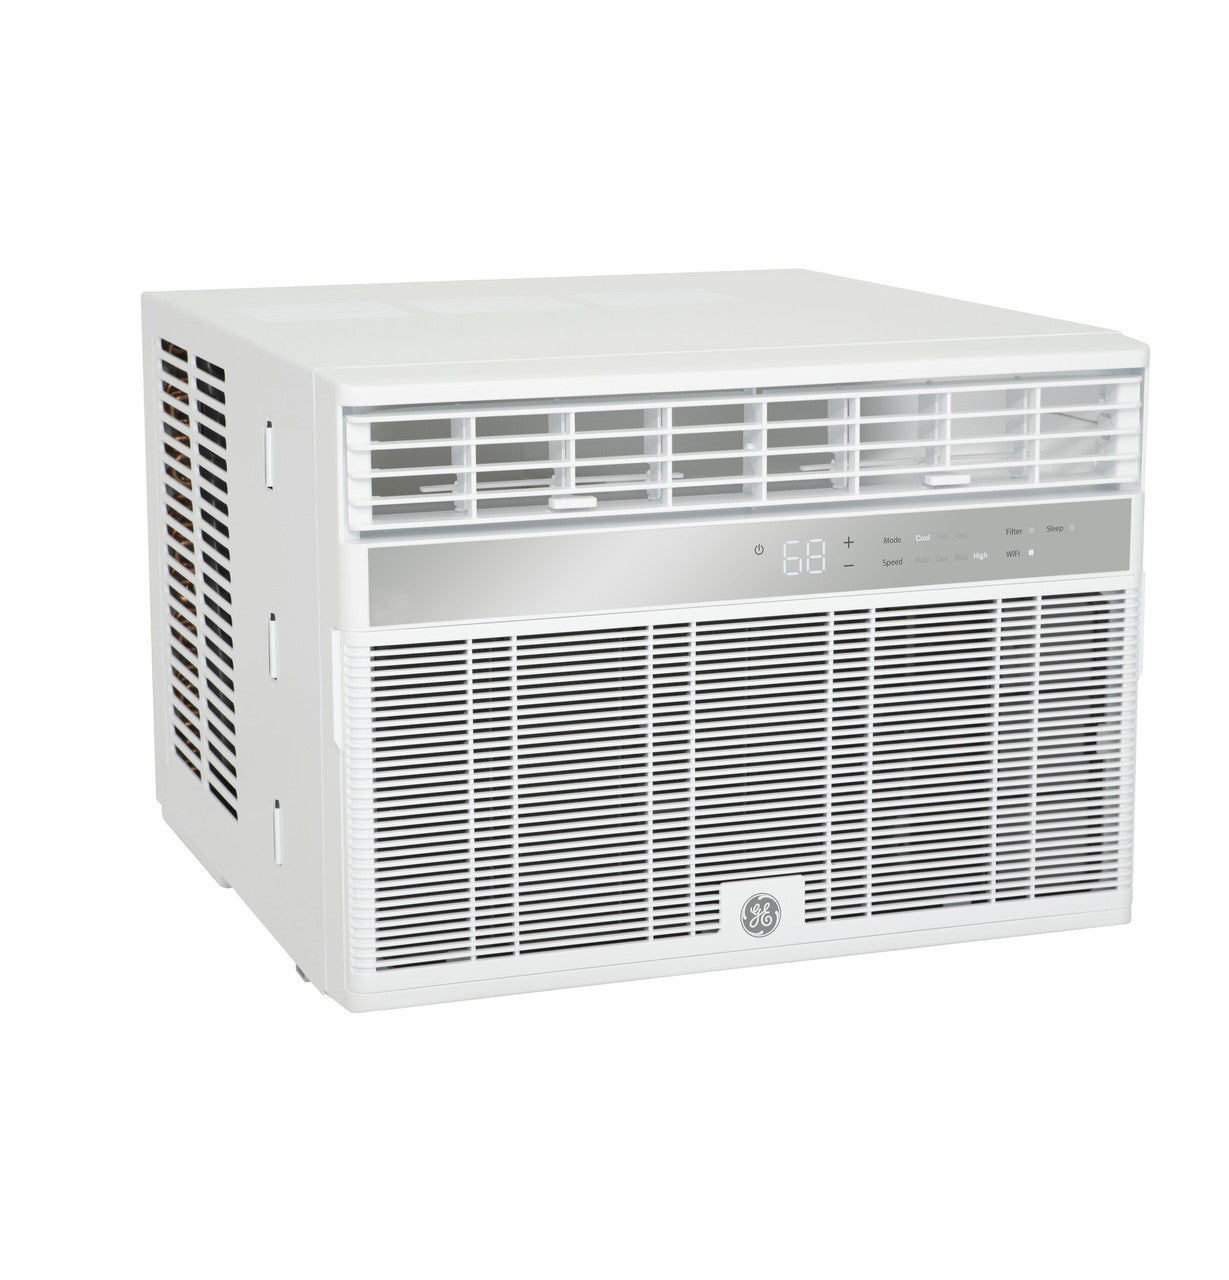 GE 14,000 BTU Smart Electronic Window Air Conditioner for Large Rooms up to 700 sq. ft. (Refurbished)